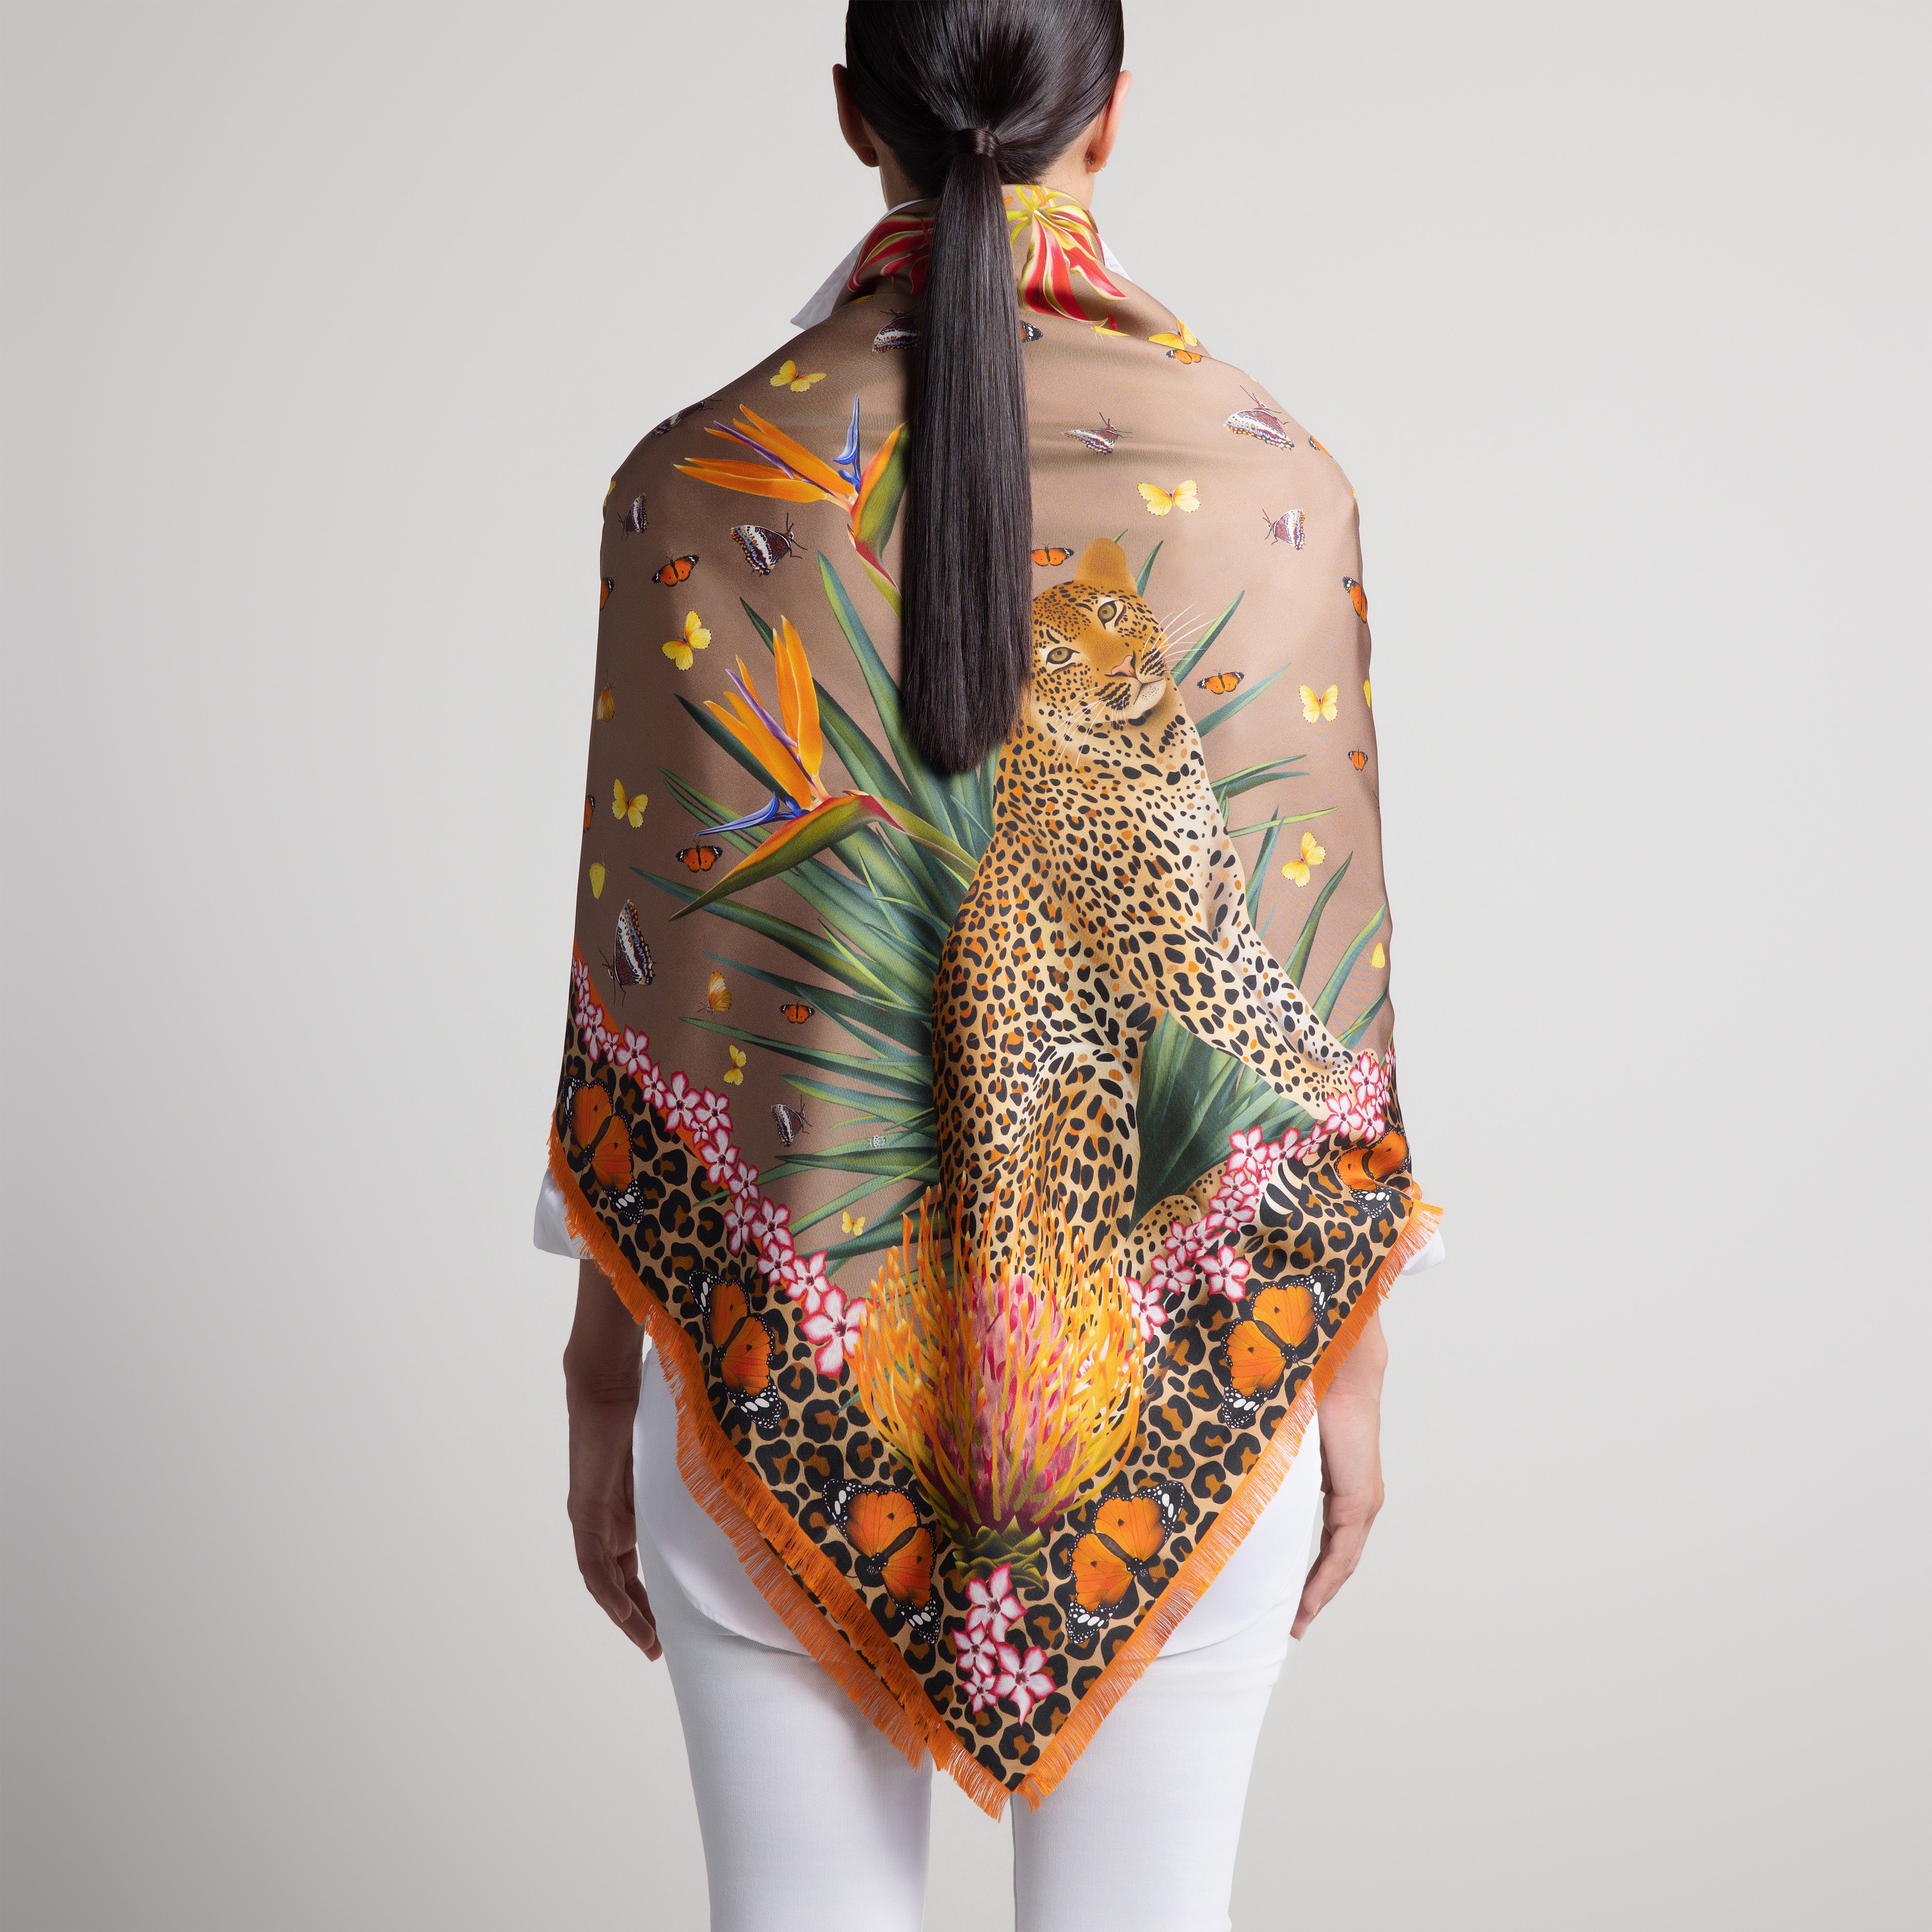 Leopard & Butterfly Grande Silk Scarf in Tan with Hand-Feathered Edges